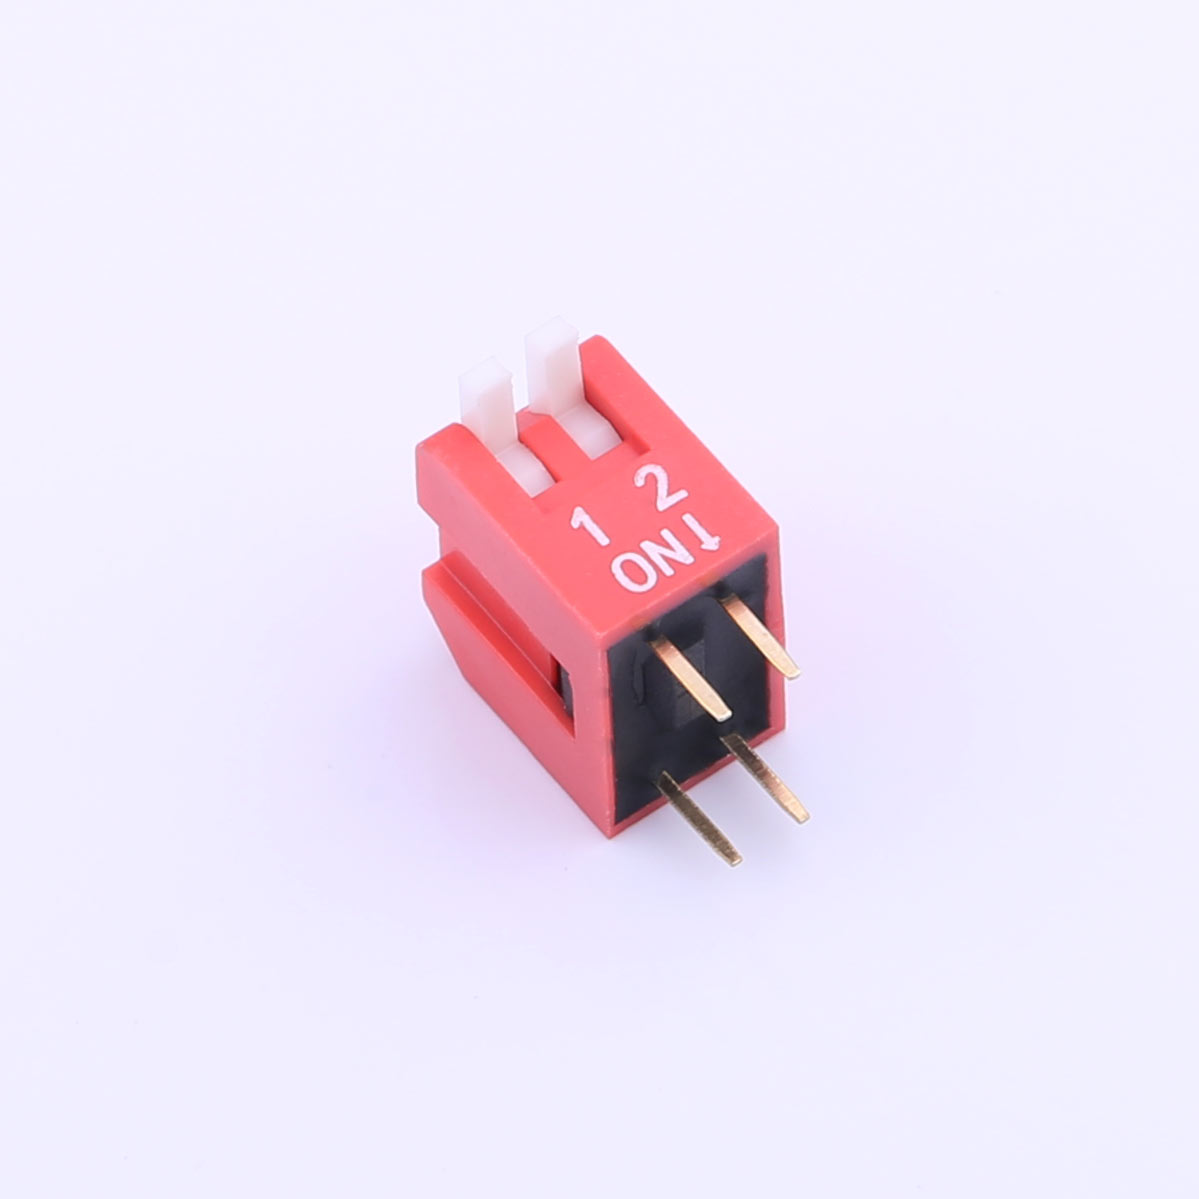 Kinghelm Pitch 2.54mm 2 Positions Red Dip Switch 100mA 24V - KH-1002-CB2.54-2P